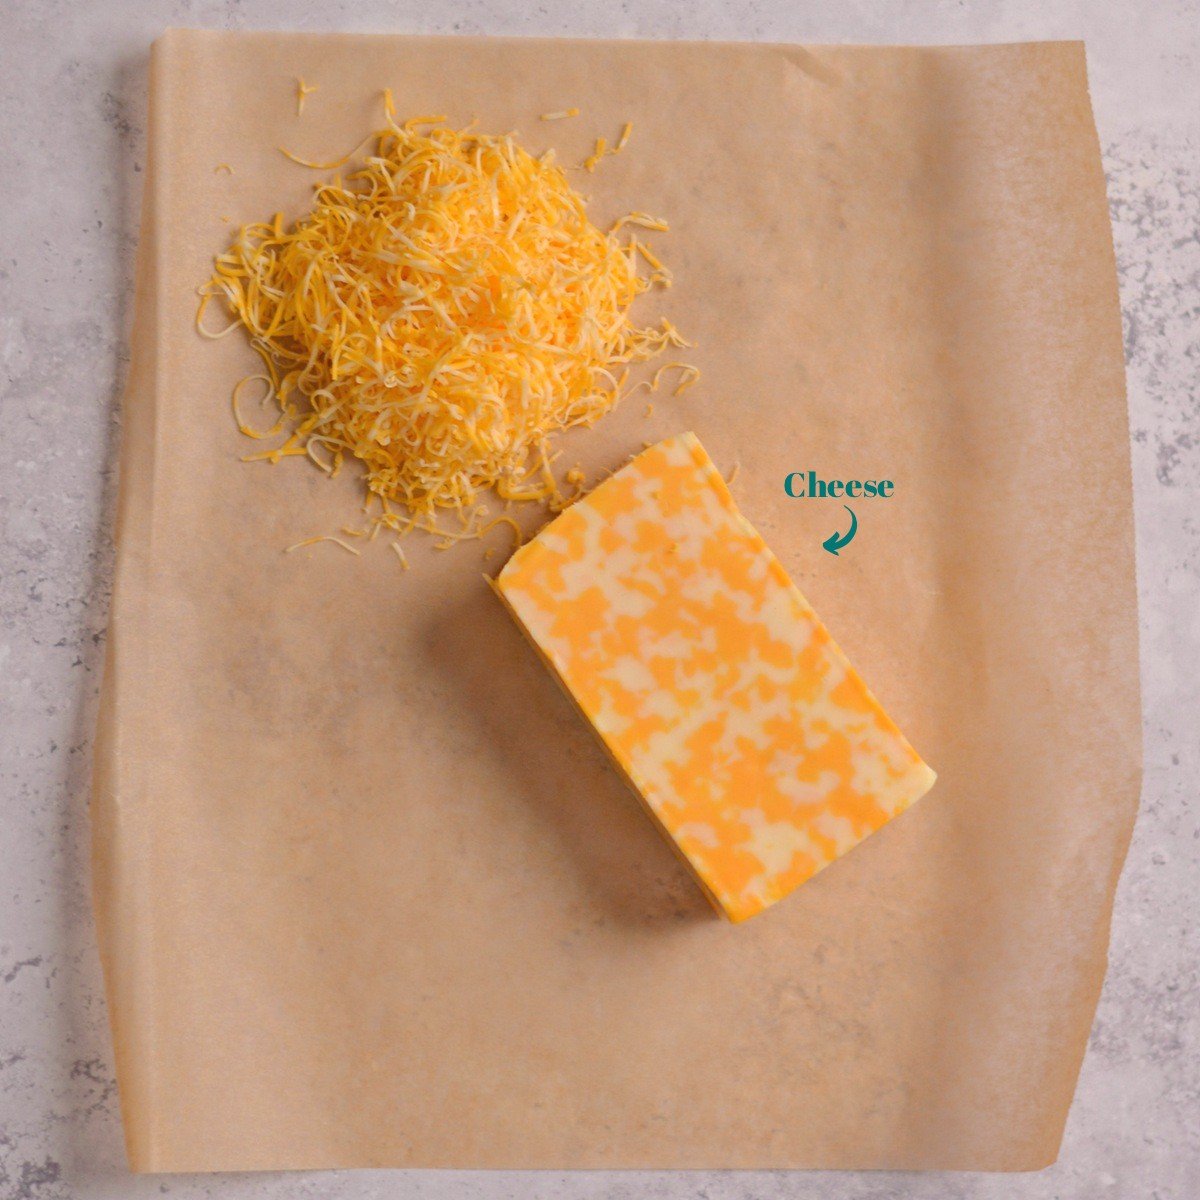 Photo of a cheese block next to shredded cheese.